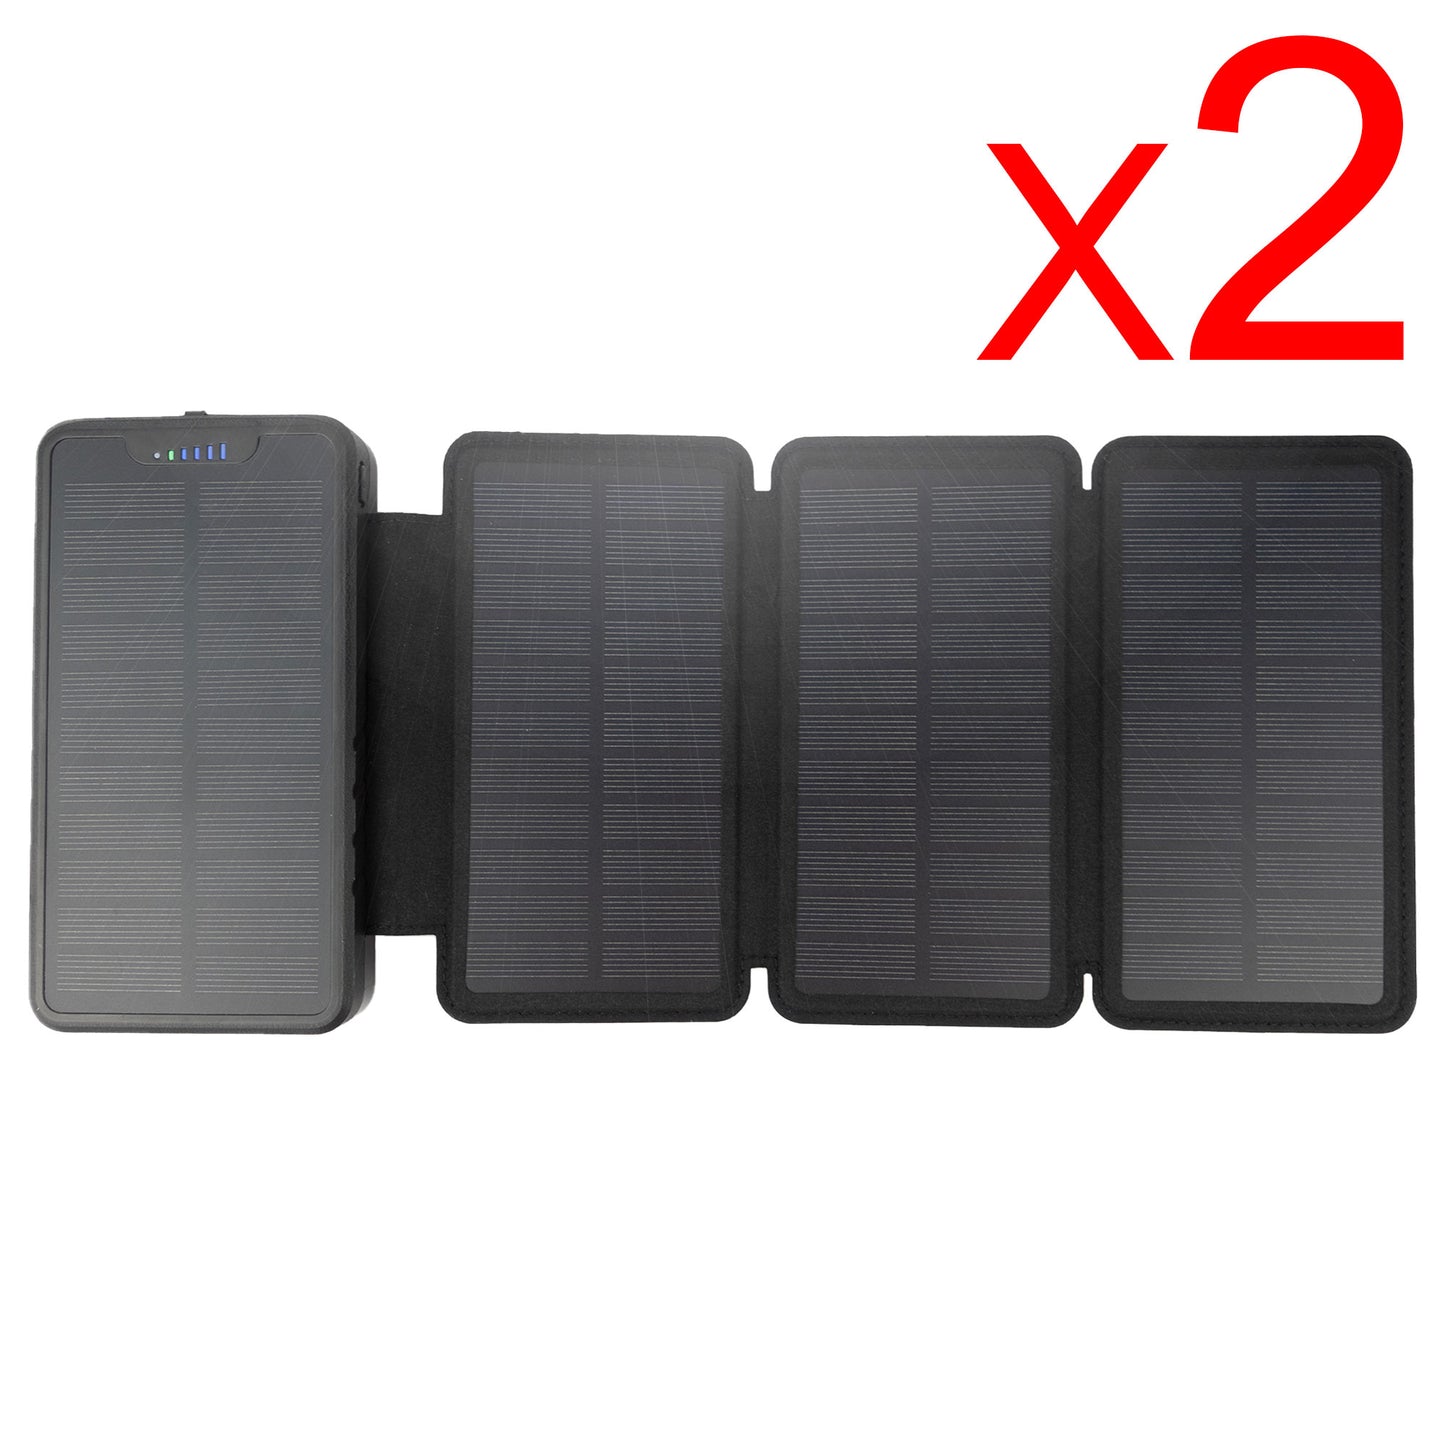 [ Pack of 2 ] Tough Light 820S 4 Panel USB Solar Power Bank Charger - 20,000mAh Li Polymer with USB Phone Charging - 2AMP High Speed Cable Included